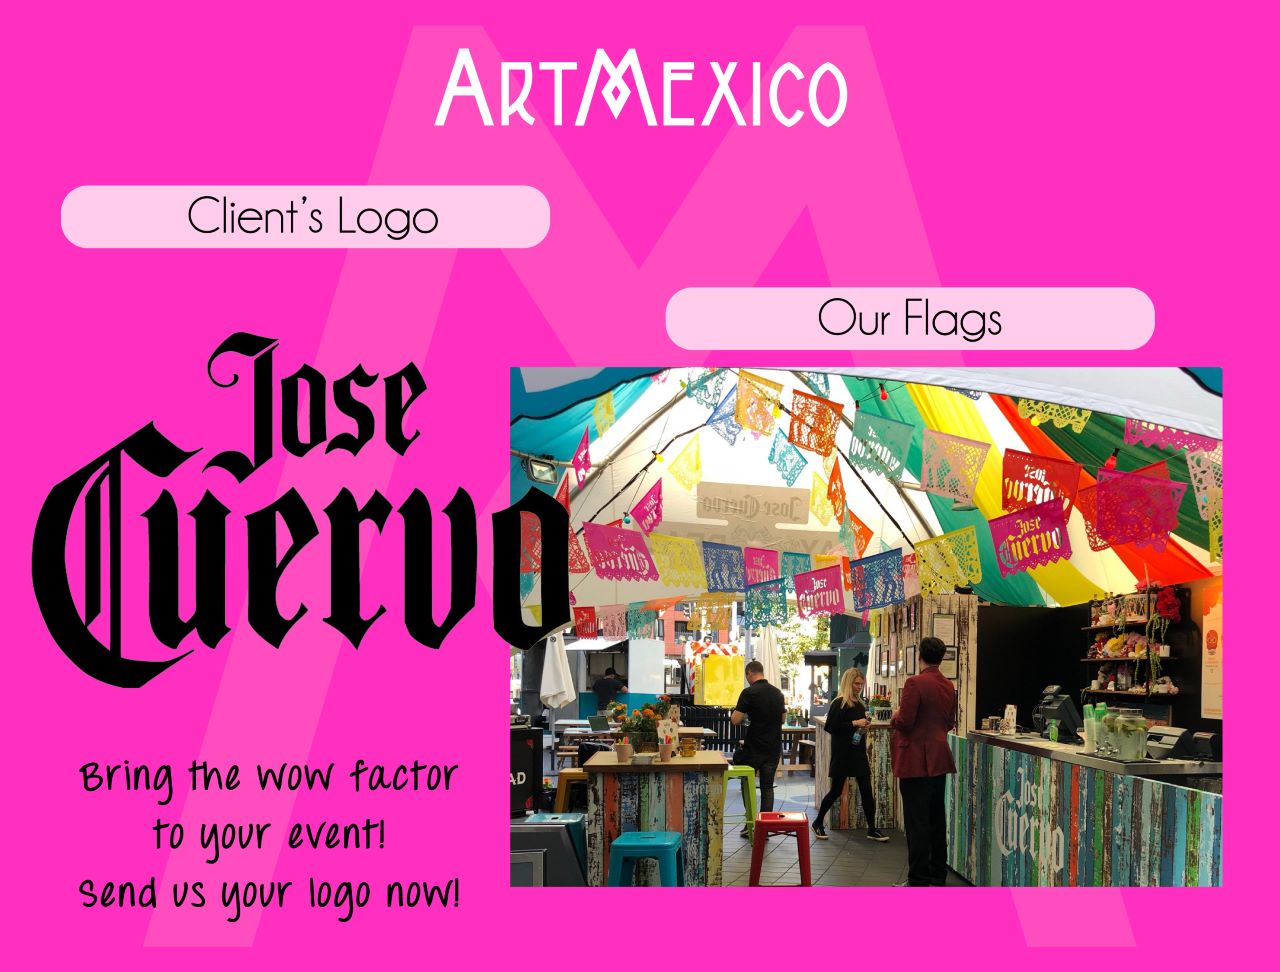 custom papel picado tissue paper bunting made for client Jose Cuervo